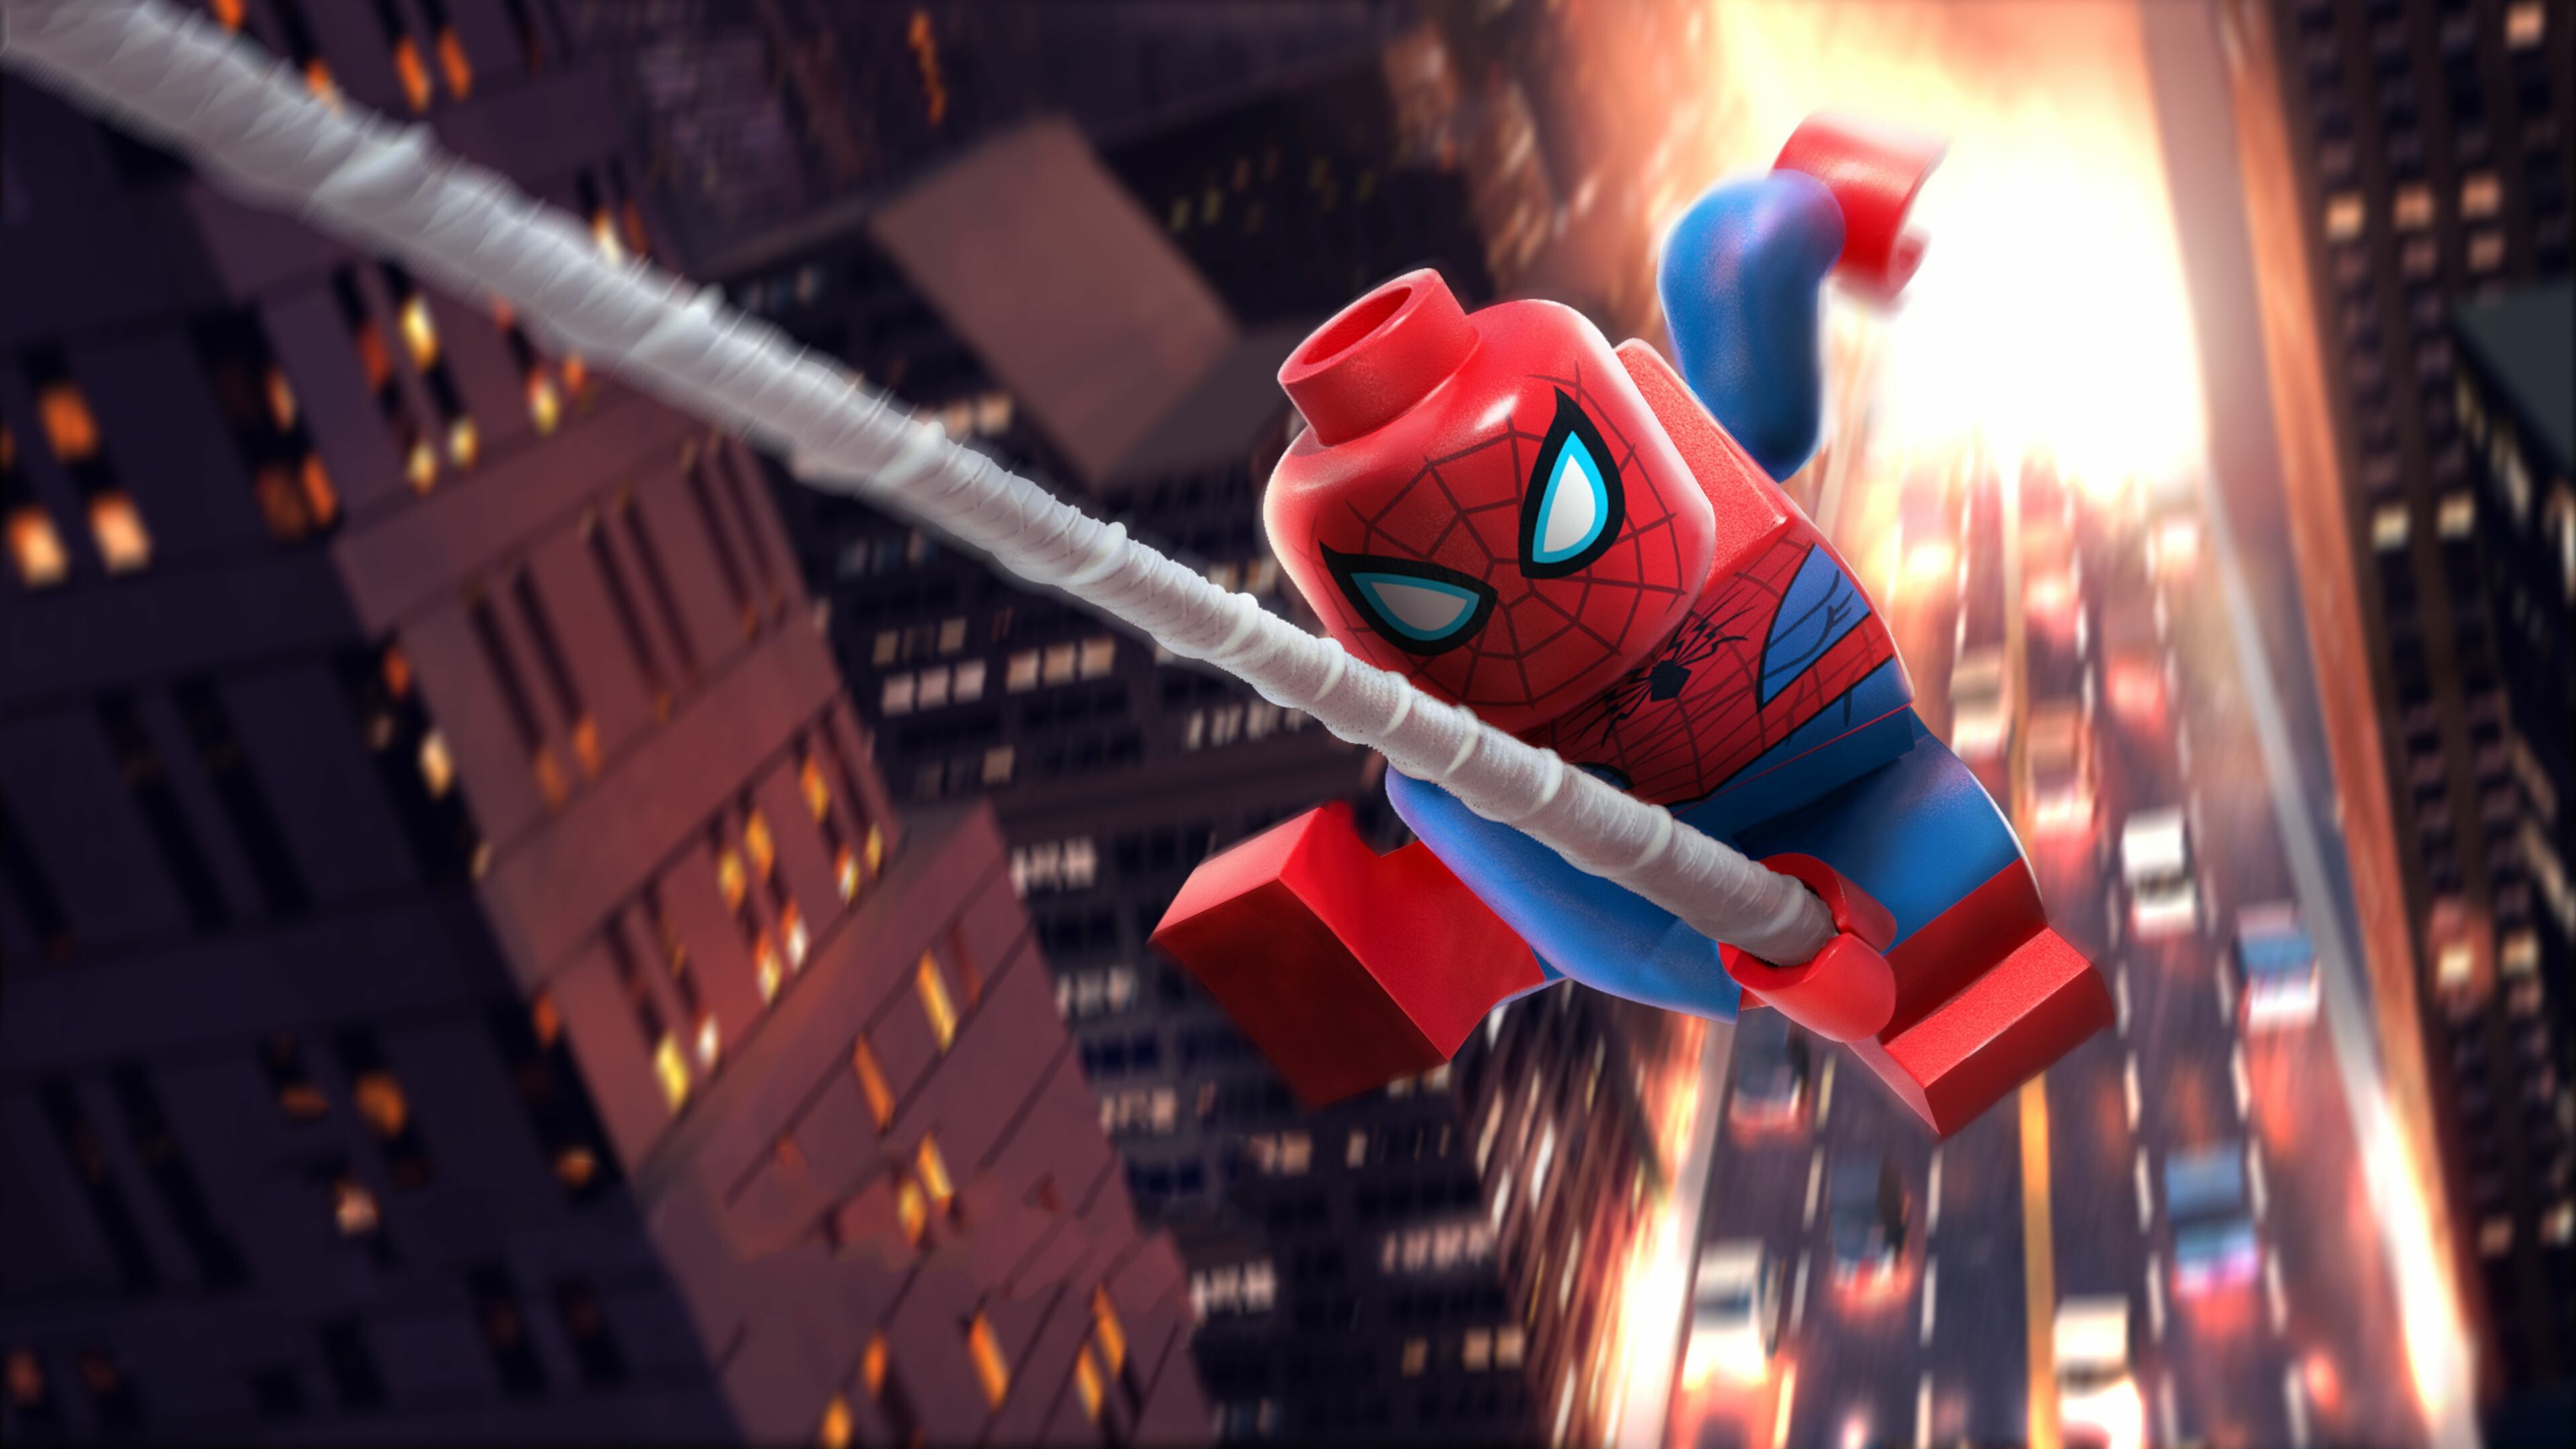 Lego: Spider-Man, Bricks are compatible with different building systems. 3840x2160 4K Wallpaper.